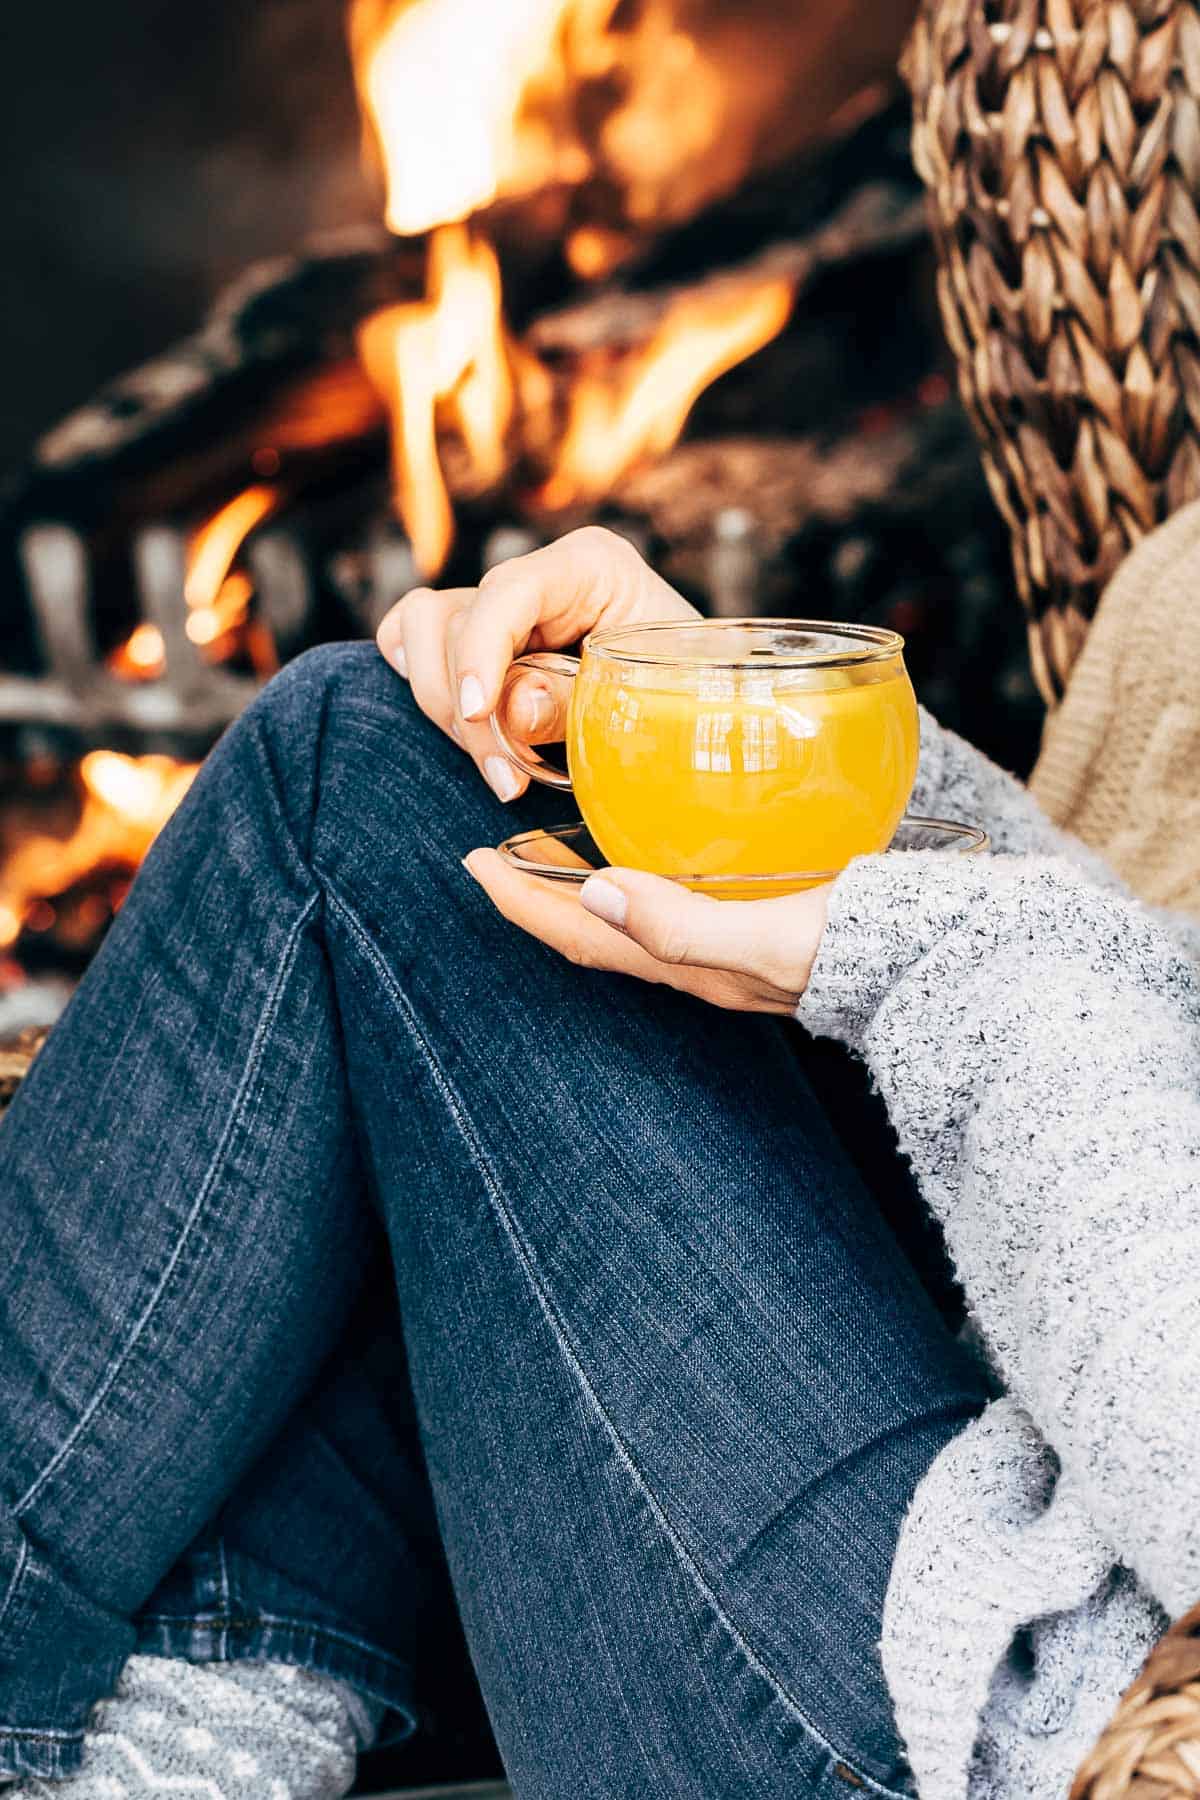 A woman is photographed from the front view as she is holding a glass of turmeric ginger tea behind a fire place.